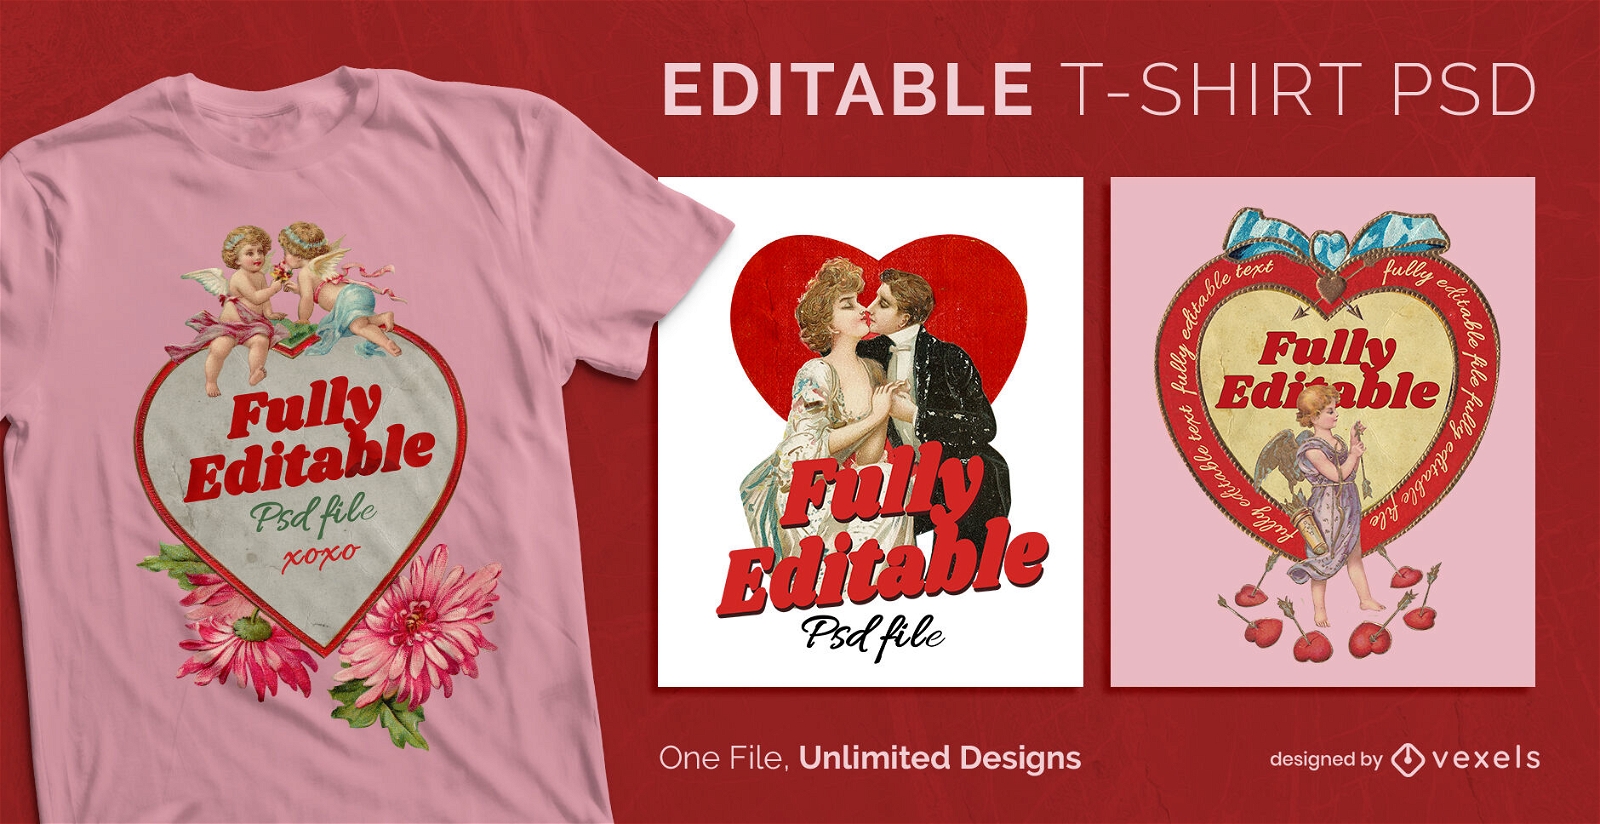 Vintage valentines day scalable t-shirt psd